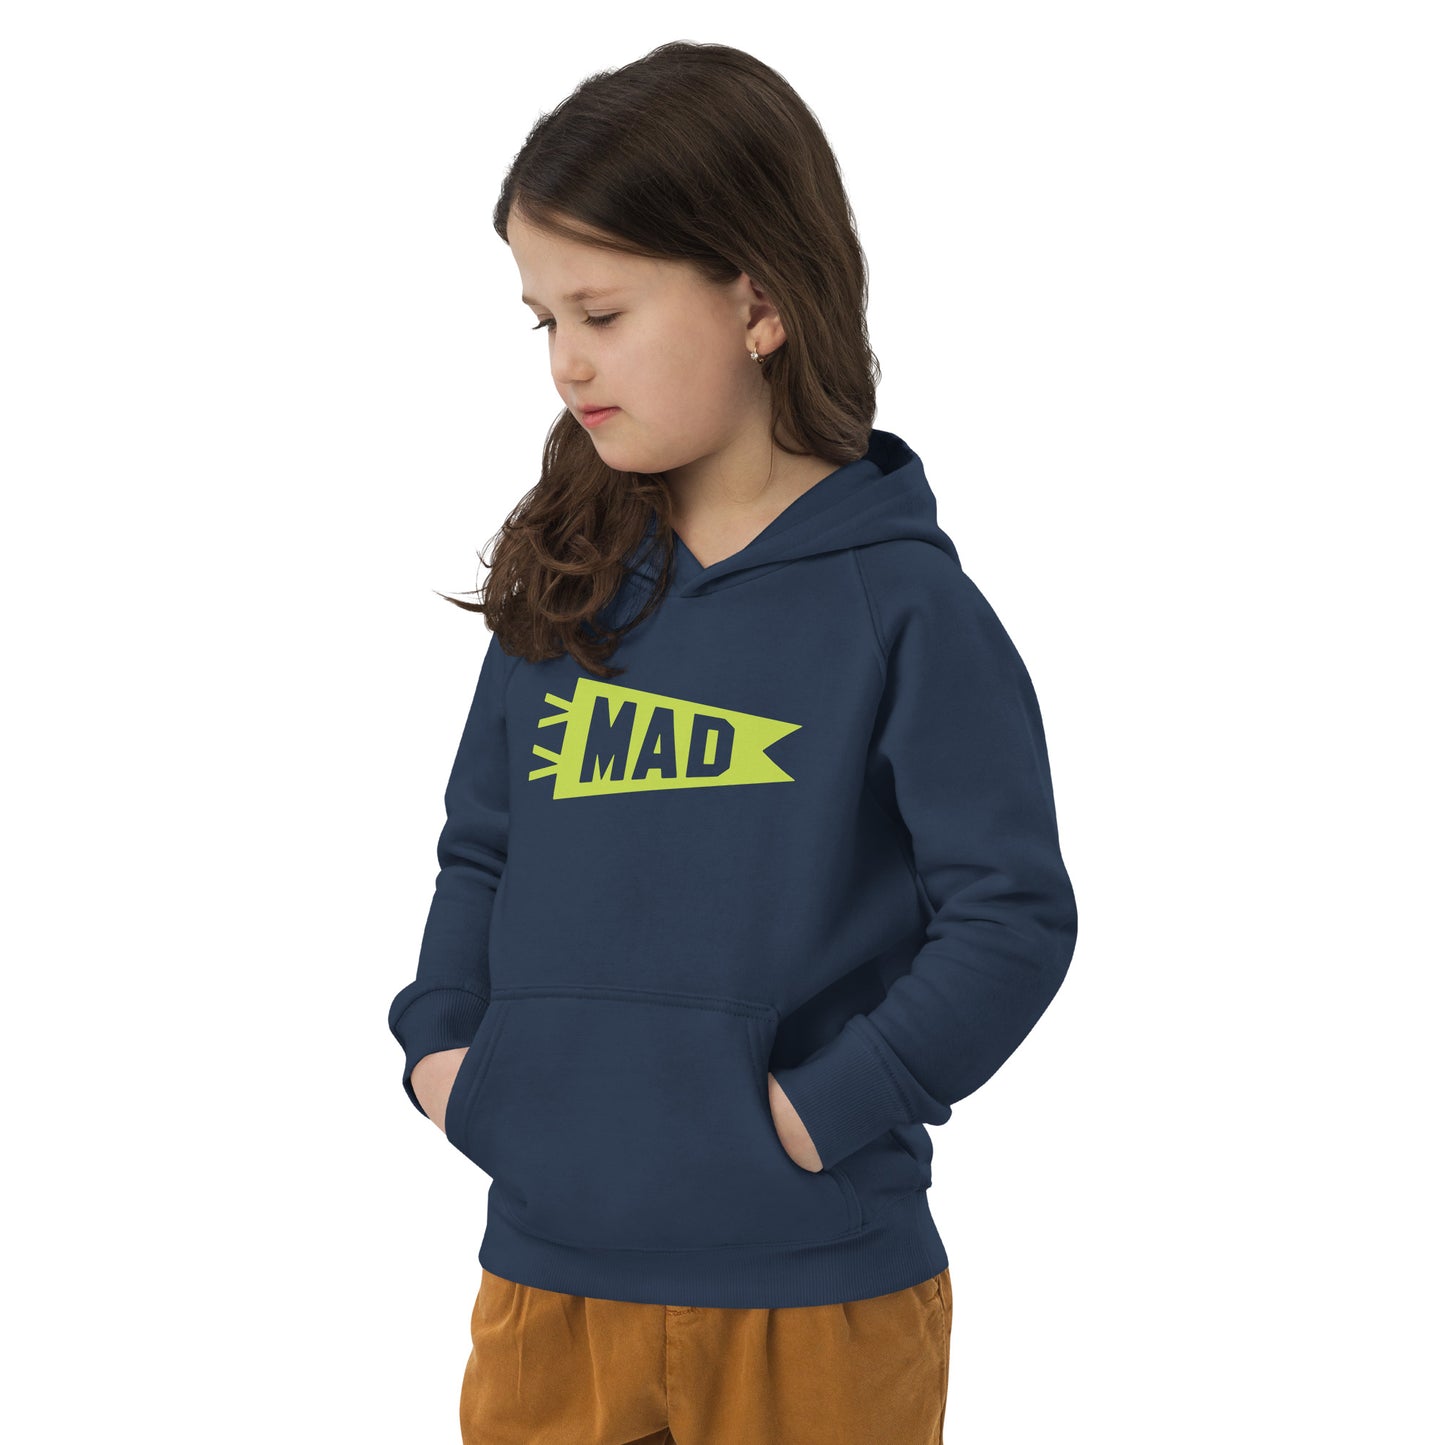 Kid's Sustainable Hoodie - Green Graphic • MAD Madrid • YHM Designs - Image 05